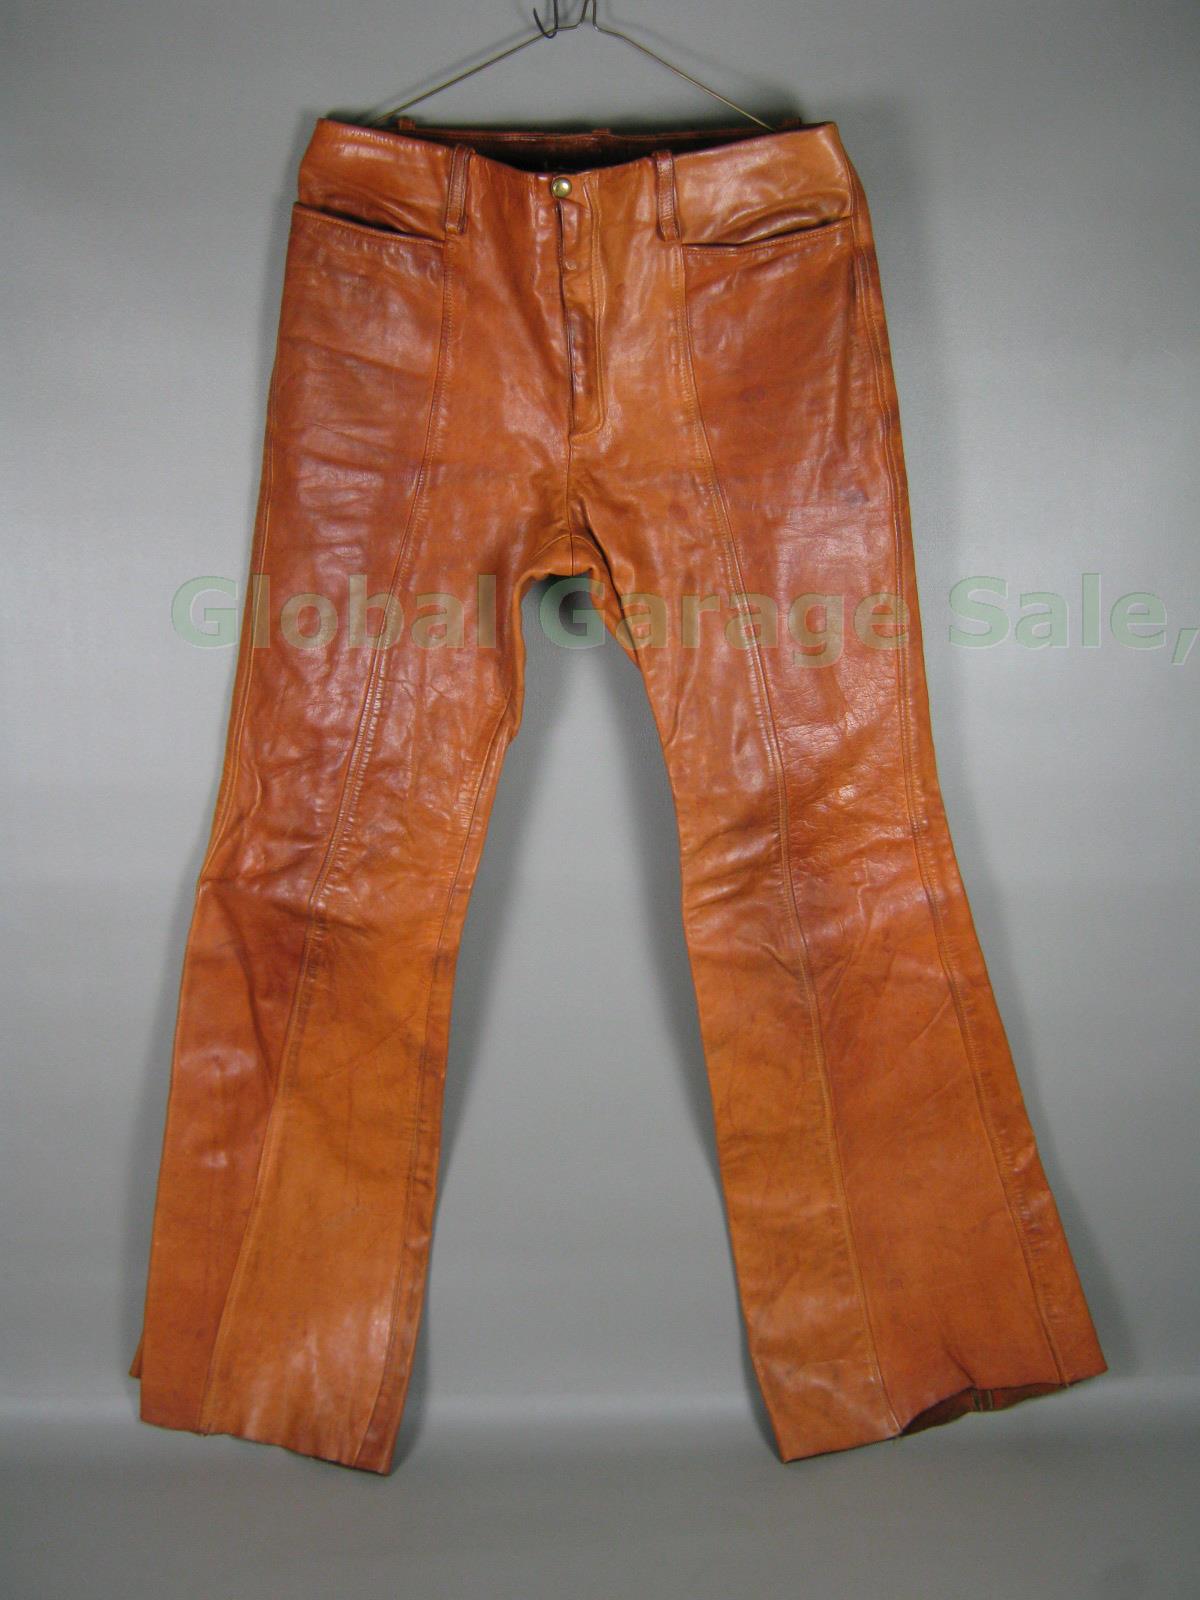 Vtg 1960s 1970s Vermont Made Leather Bell Bottom Hippie Rock Star Pants 31" x32"